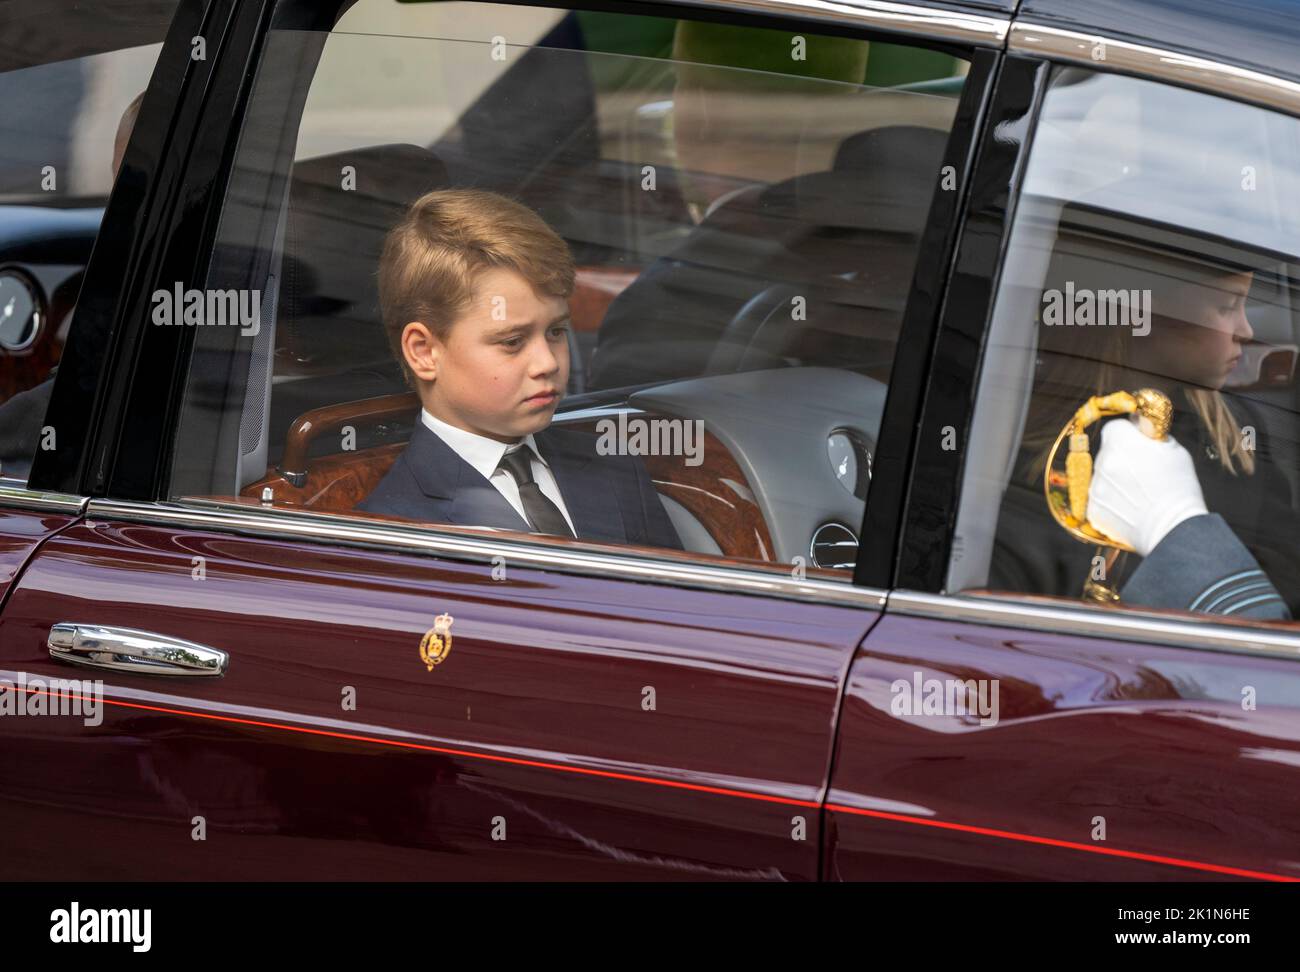 Prince George leaves in a car following the the coffin of Queen Elizabeth II as it departs from at Wellington Arch during the Ceremonial Procession after her State Funeral at Westminster Abbey, London. Stock Photo